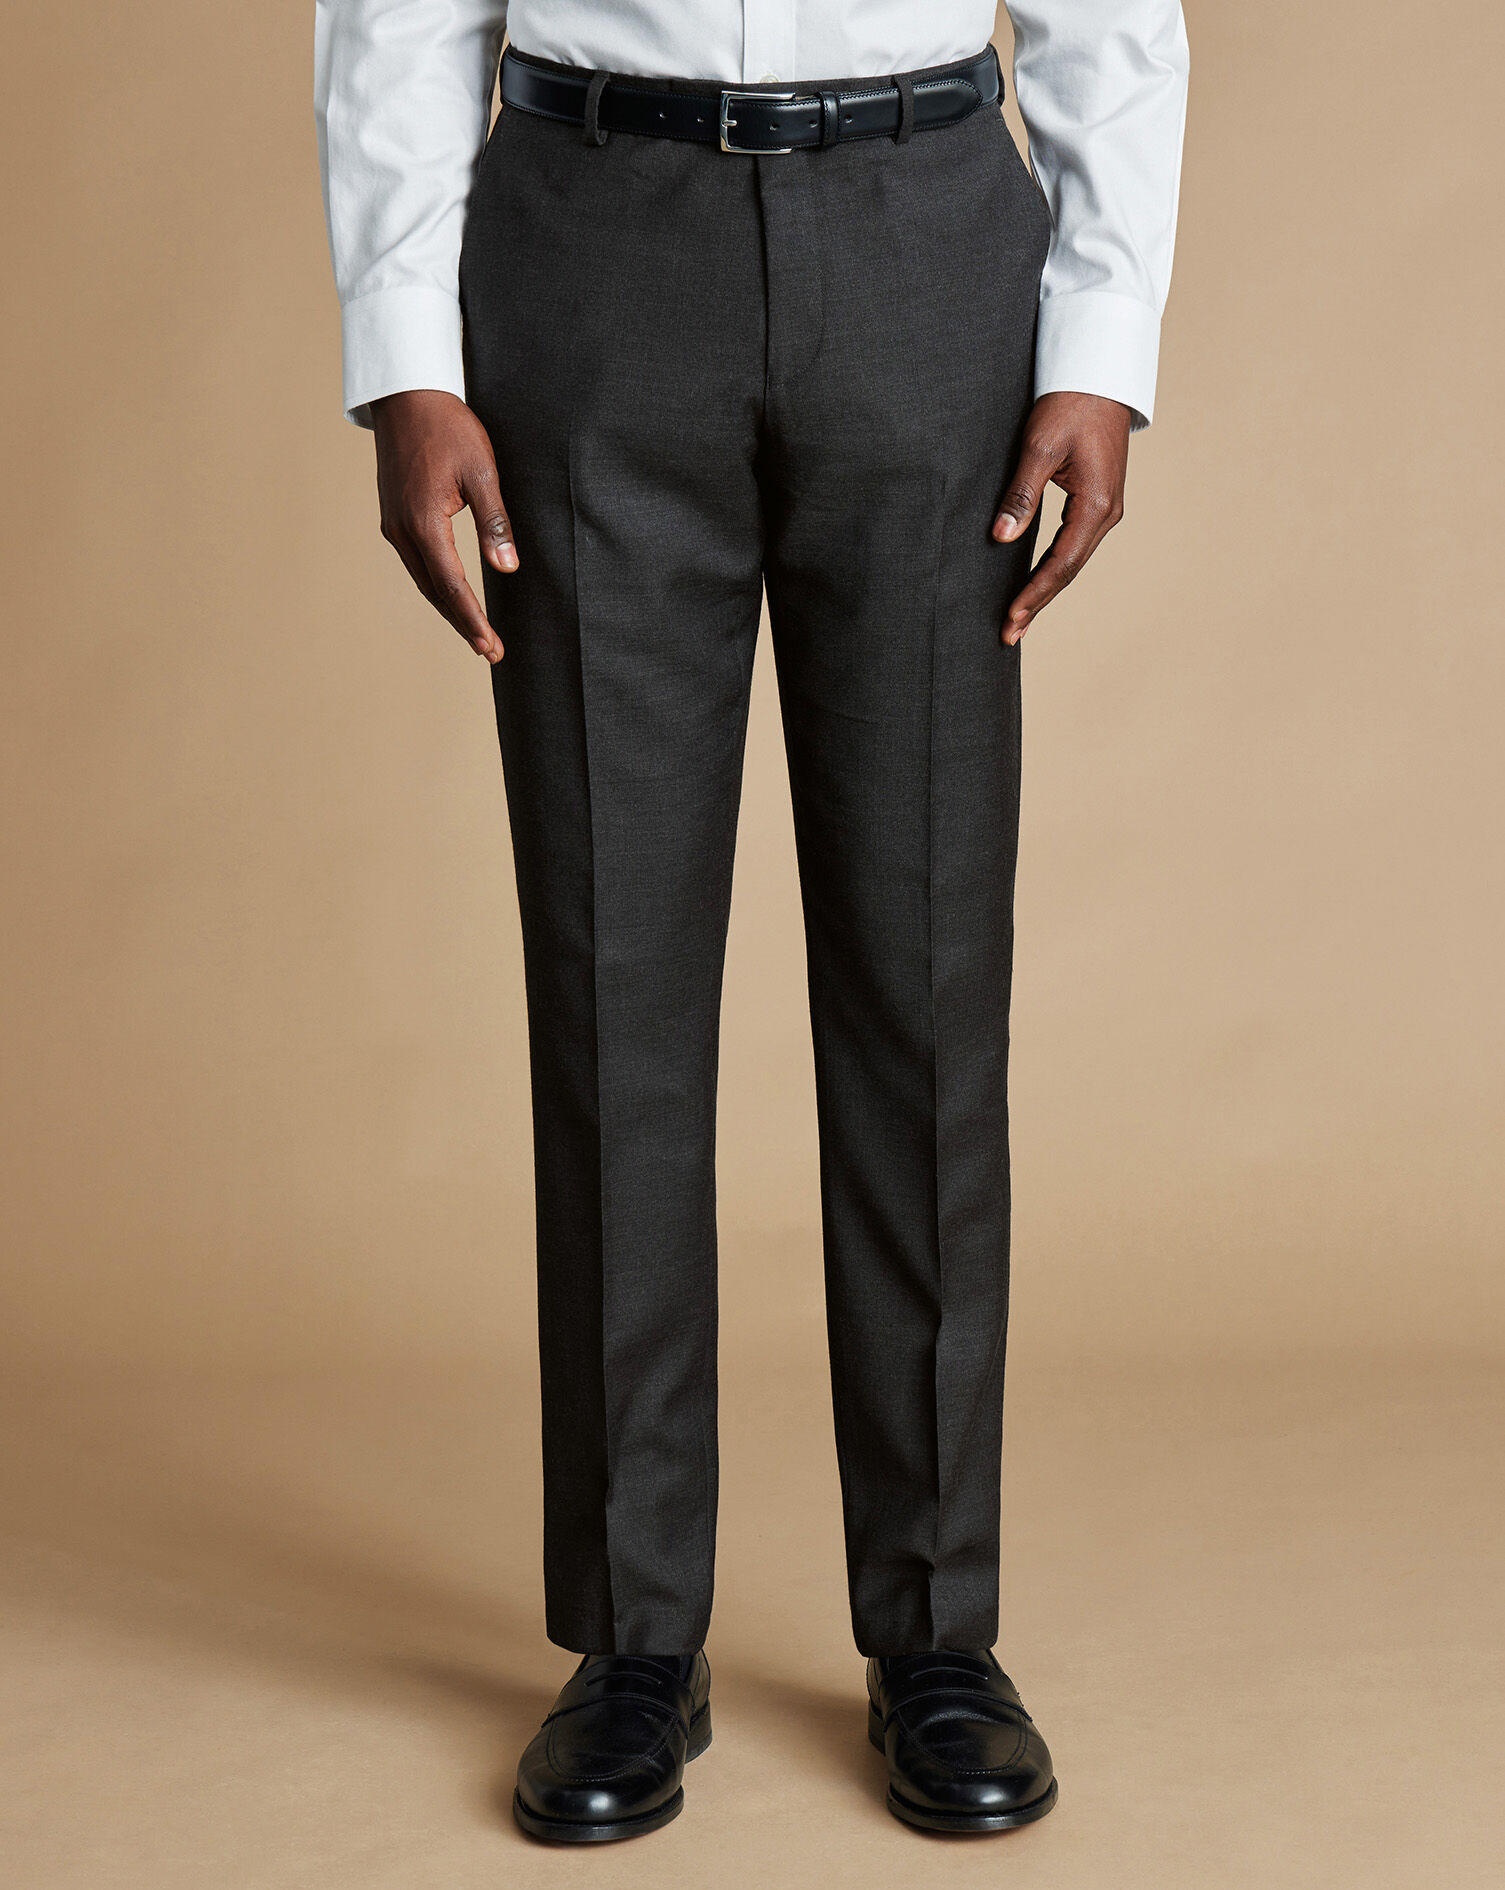 Buy Charcoal Black Trousers & Pants for Men by Marks & Spencer Online |  Ajio.com